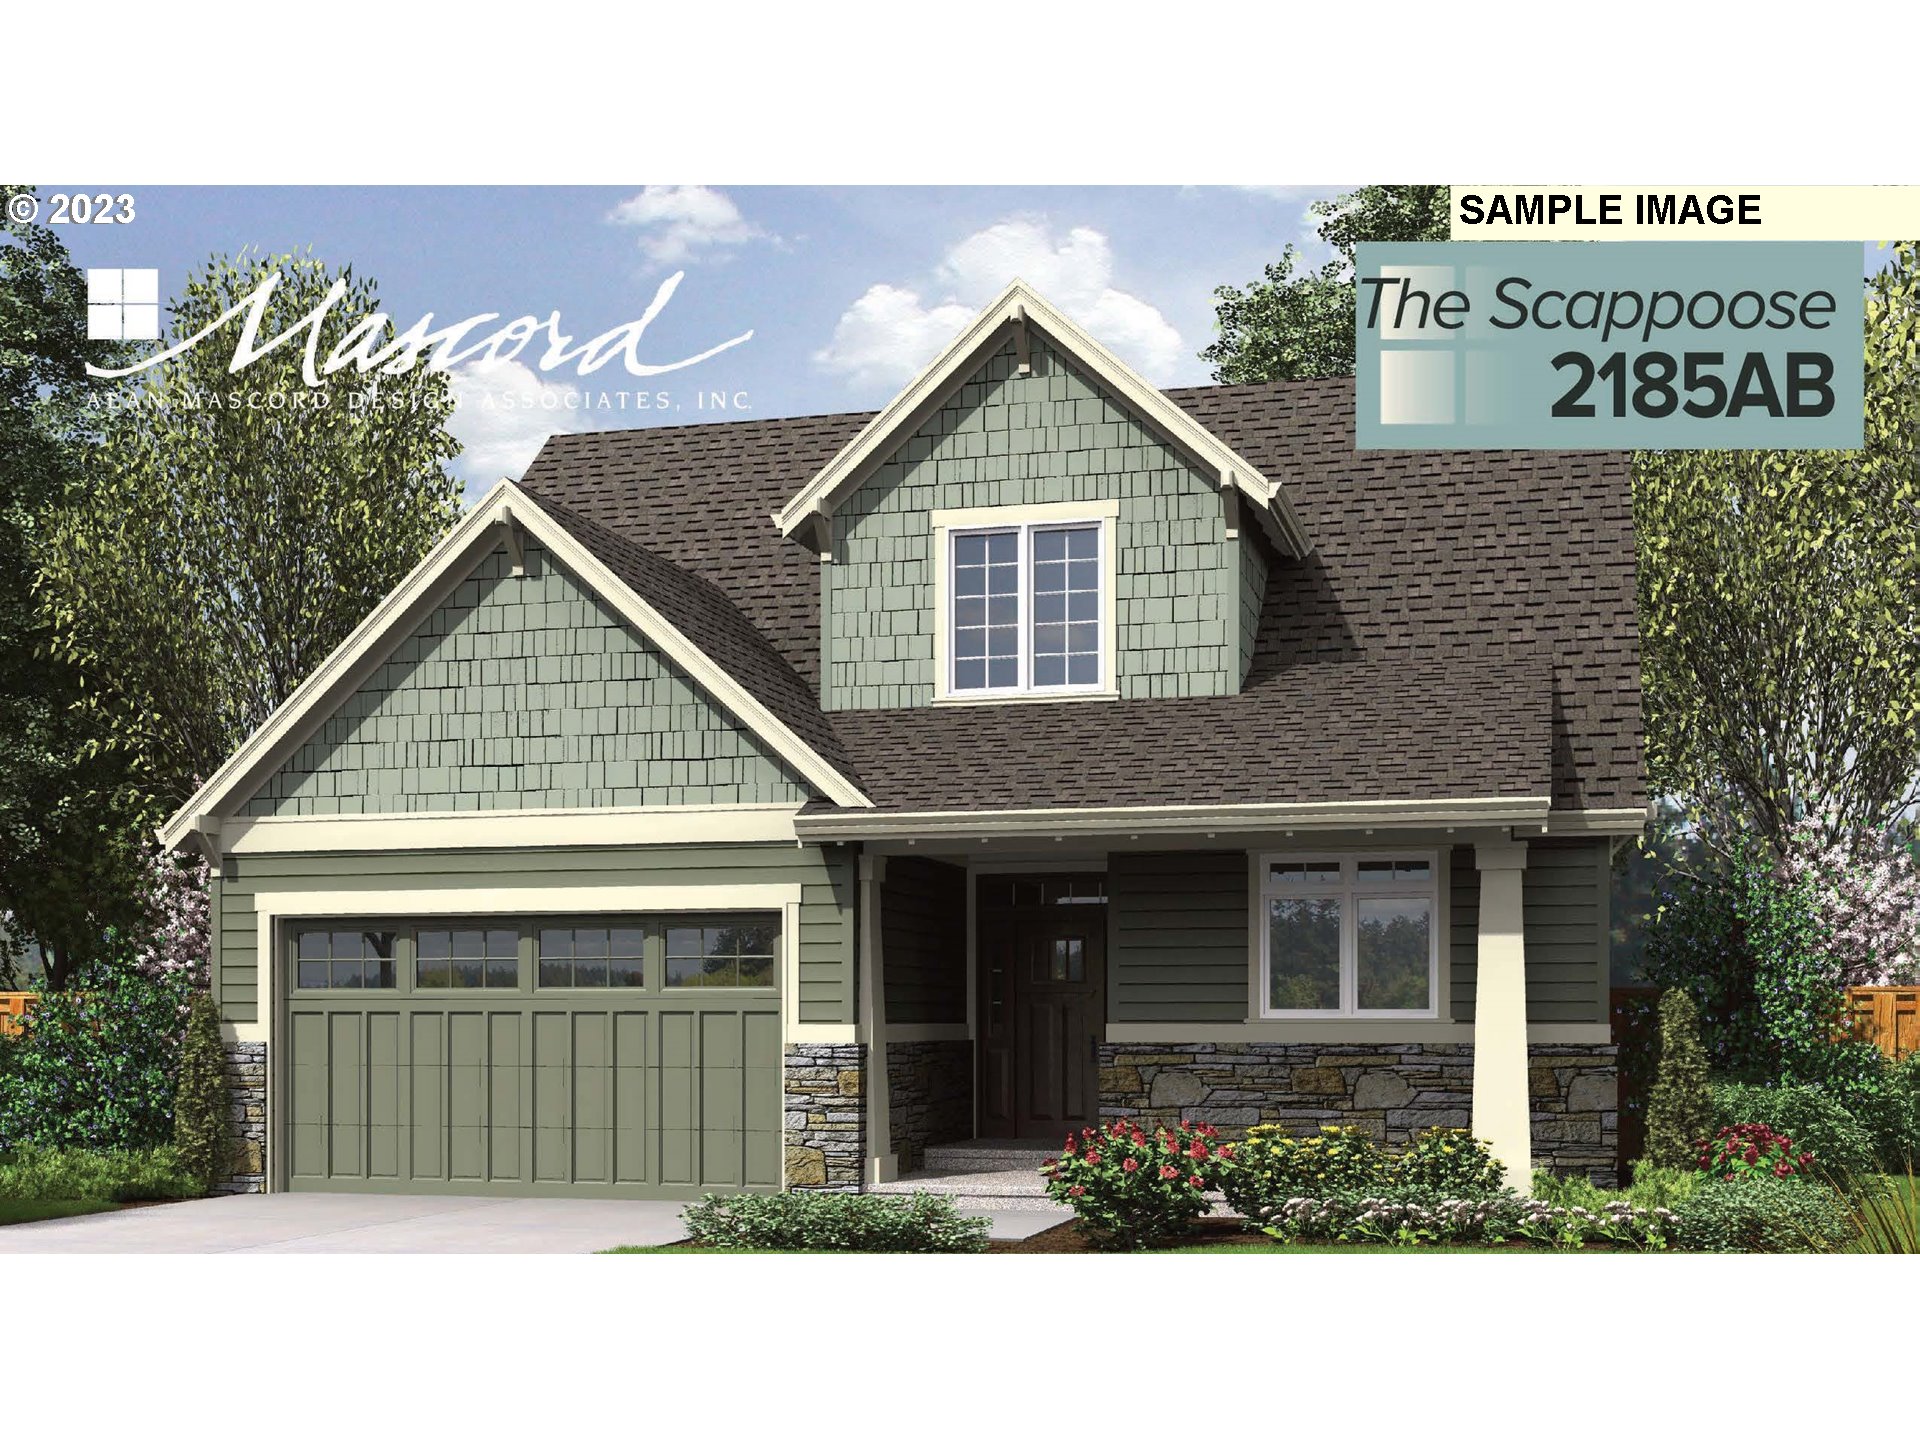 The Scappoose floor plan! Main level master in the newest subdivision in Veneta, Madrone Ridge. 3 bedroom floor plan with loft or the option of a 4th bedroom. 2074 total sq ft with oversized attached garage.